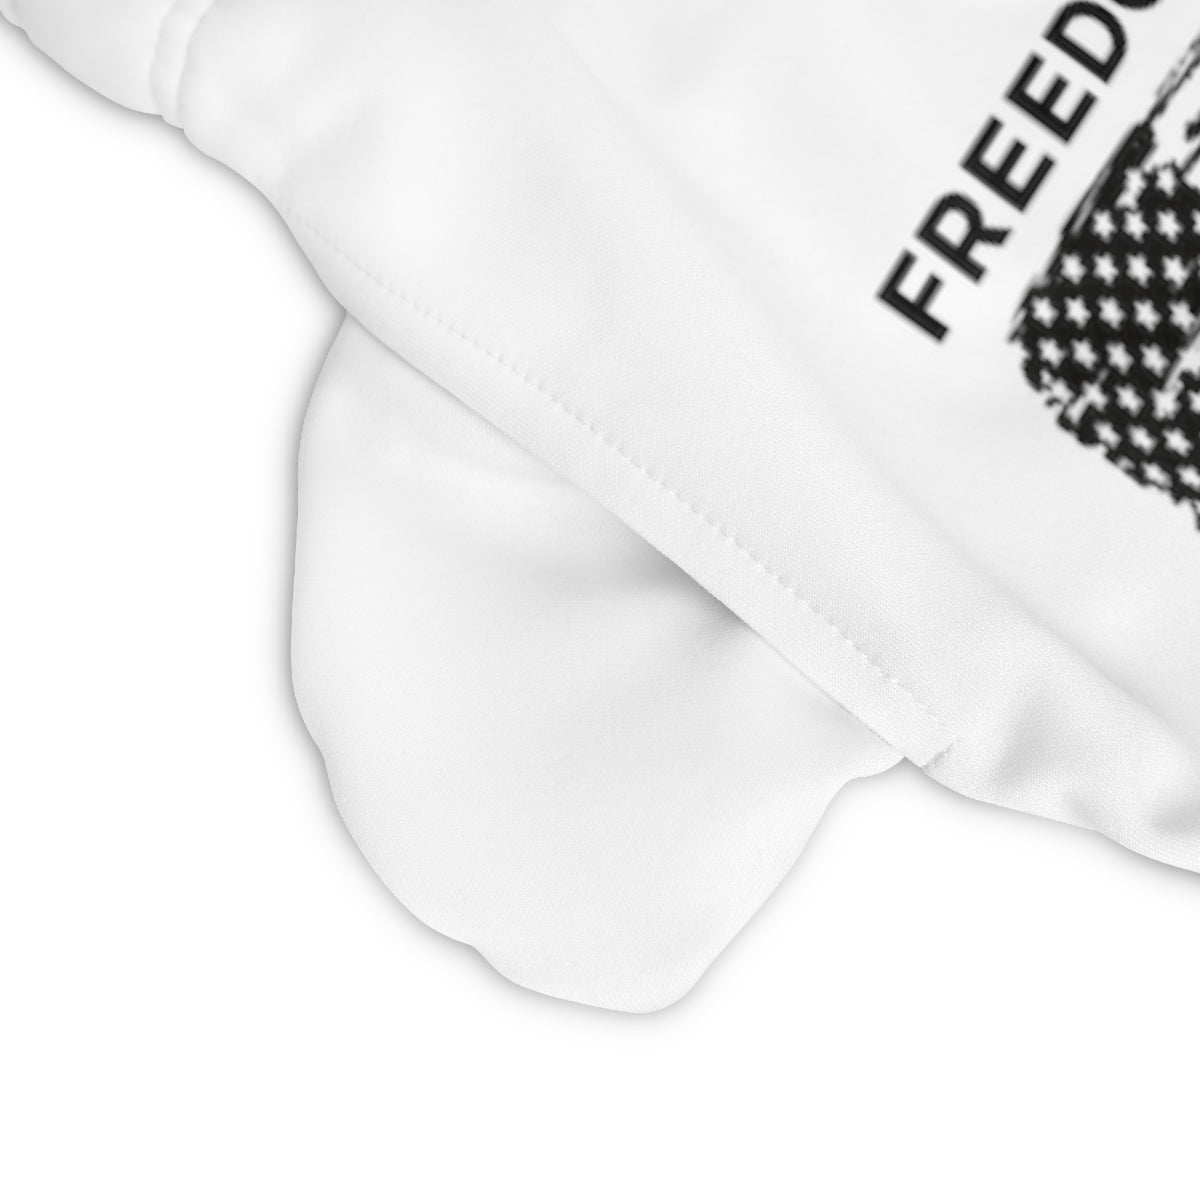 Torn Freedom - Athletic Shorts - Freedom First Supply